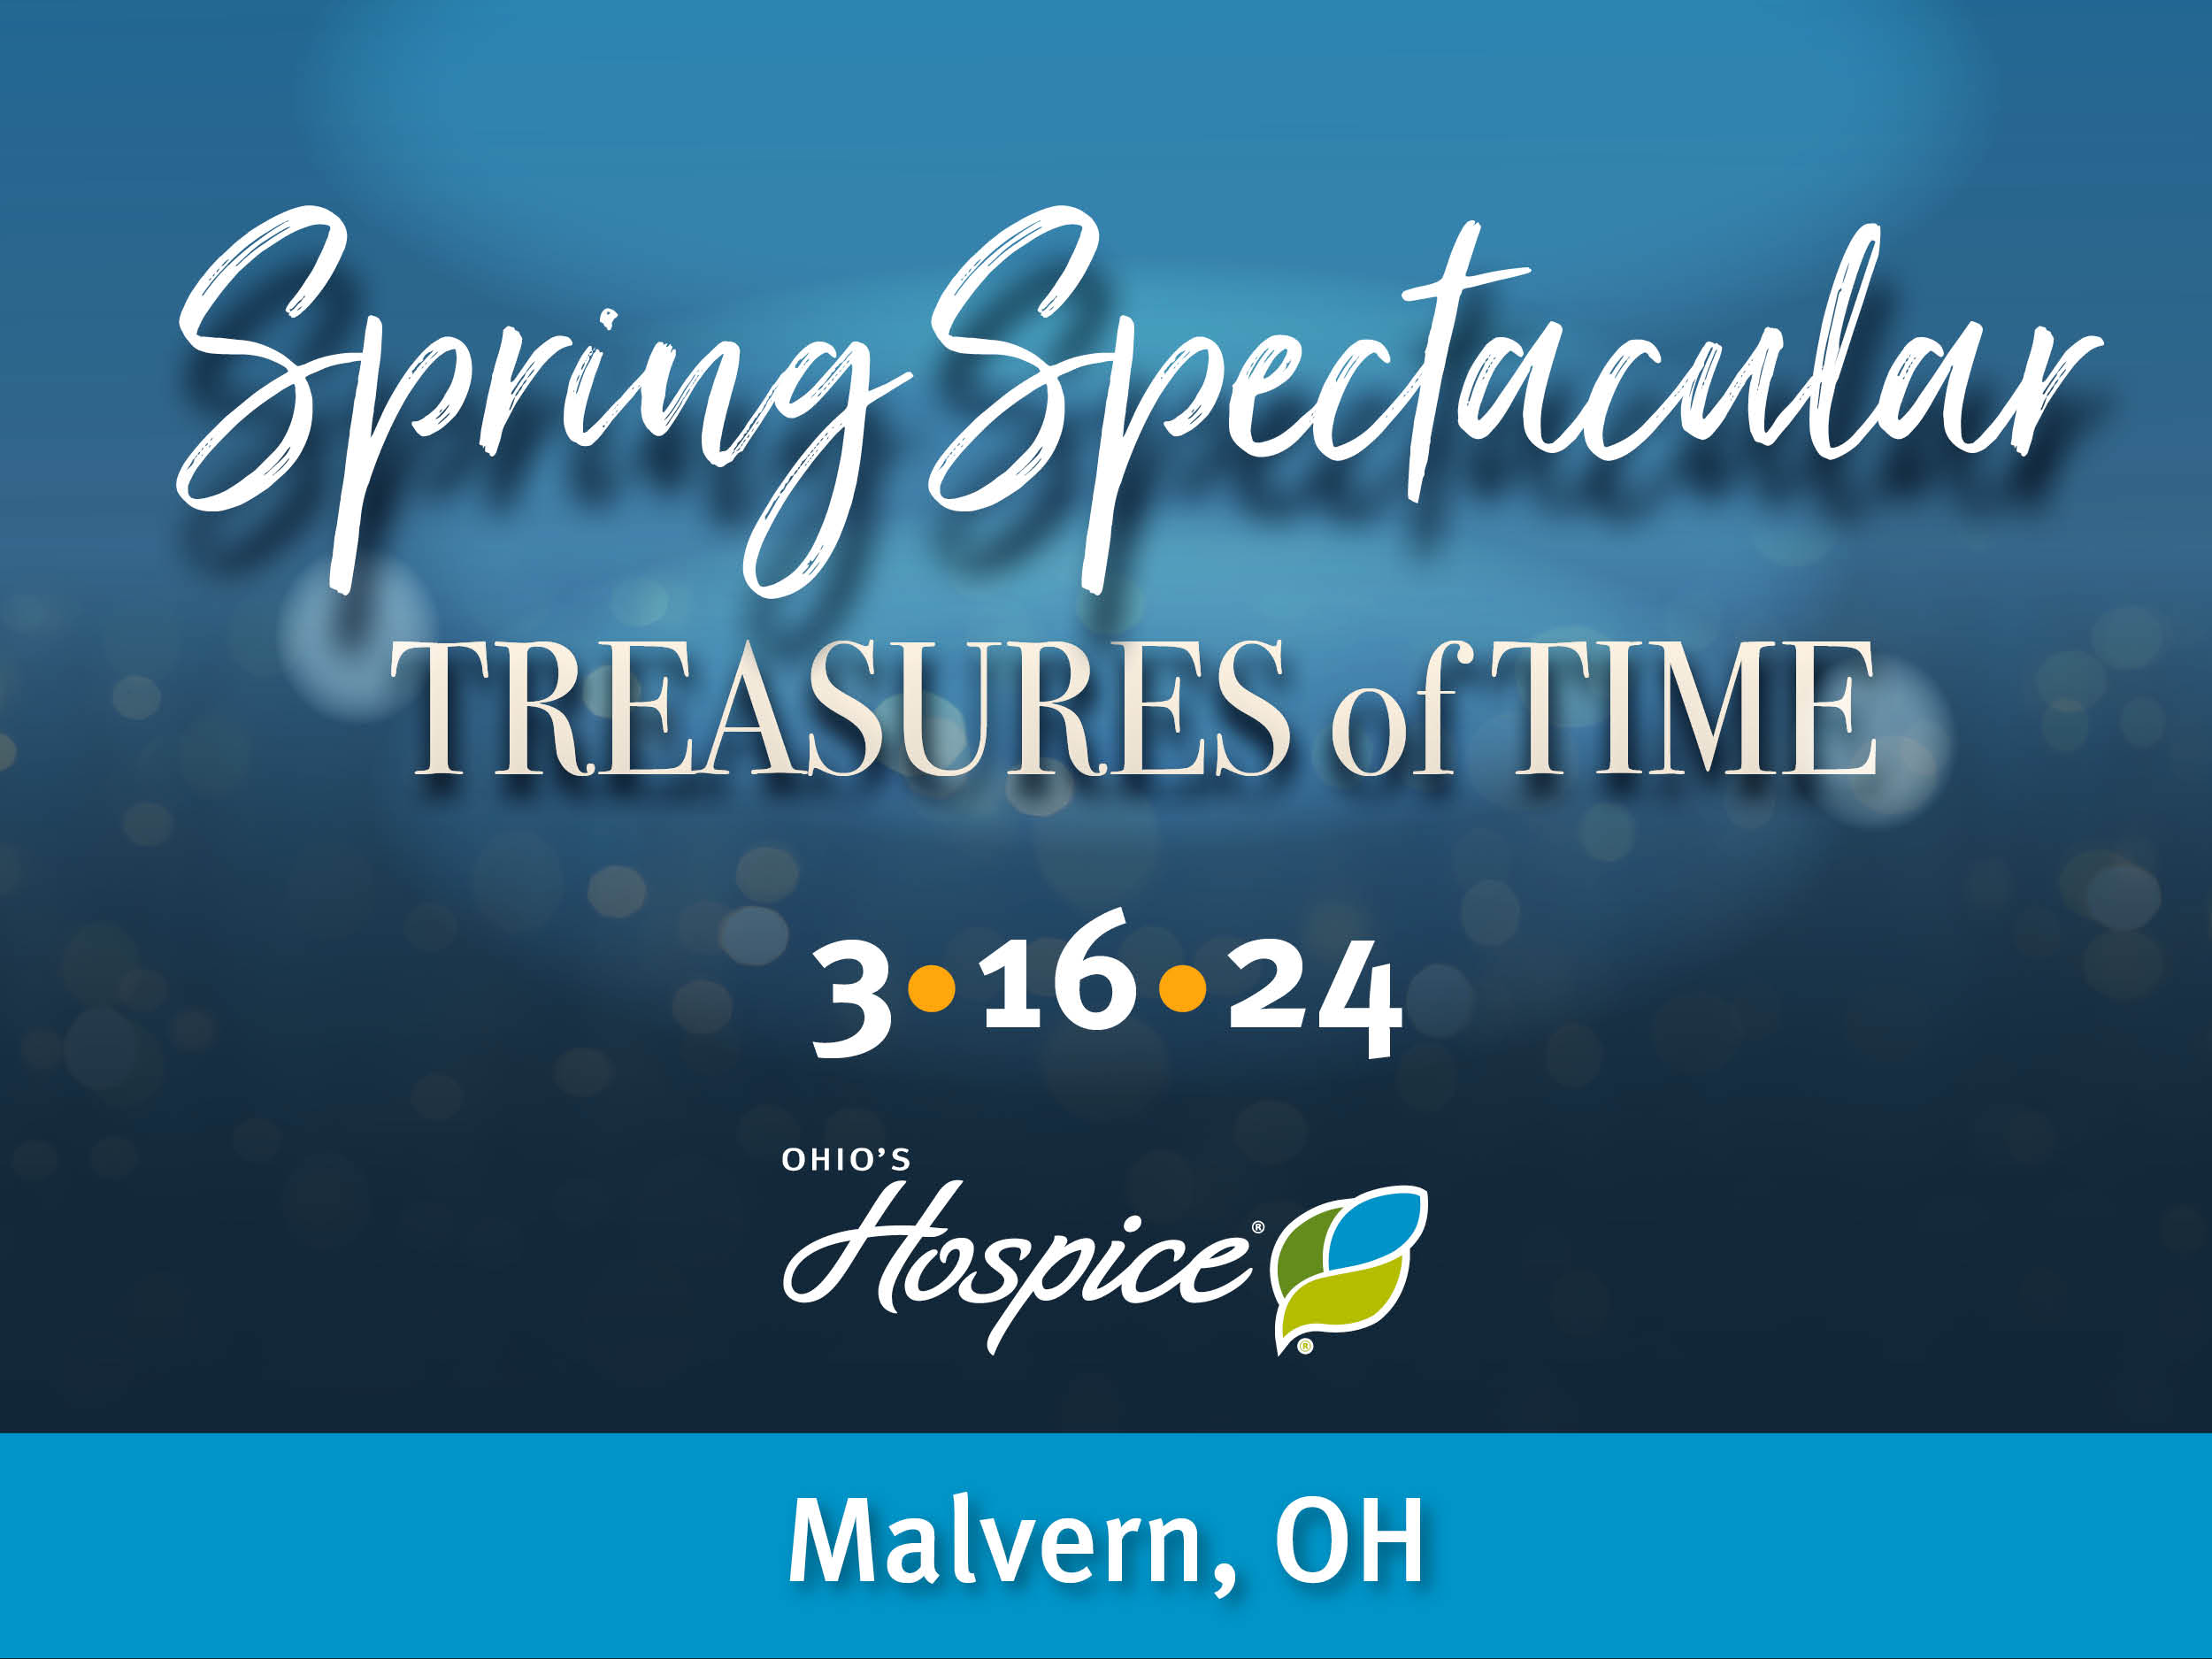 Spring Spectacular Treasures of Time 3.16.24